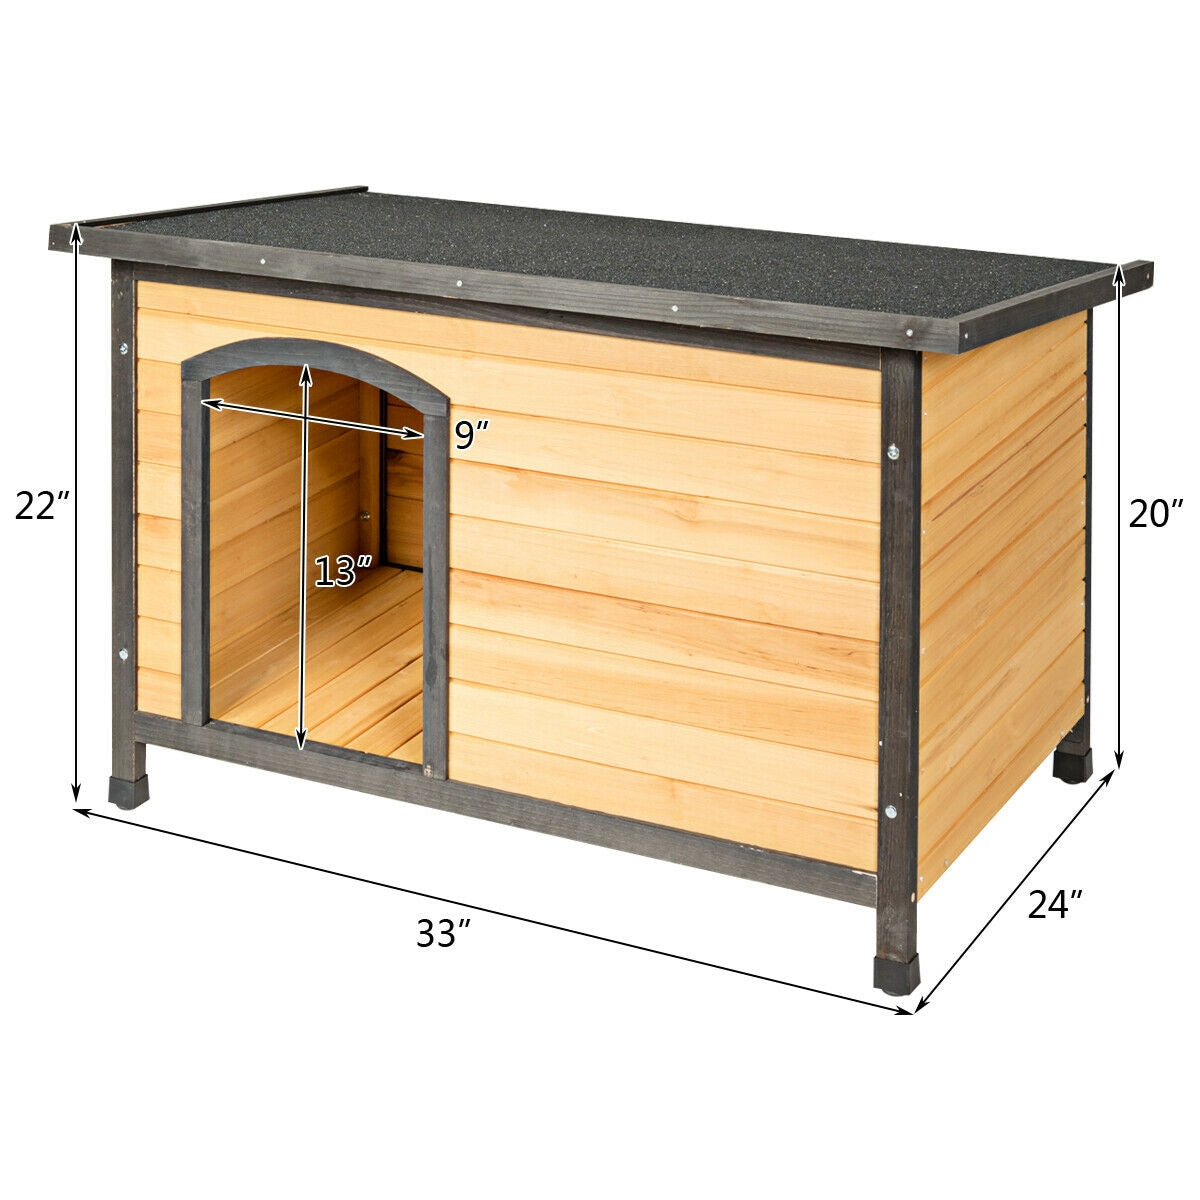 Wood Extreme Weather Resistant Pet Log Cabin-M